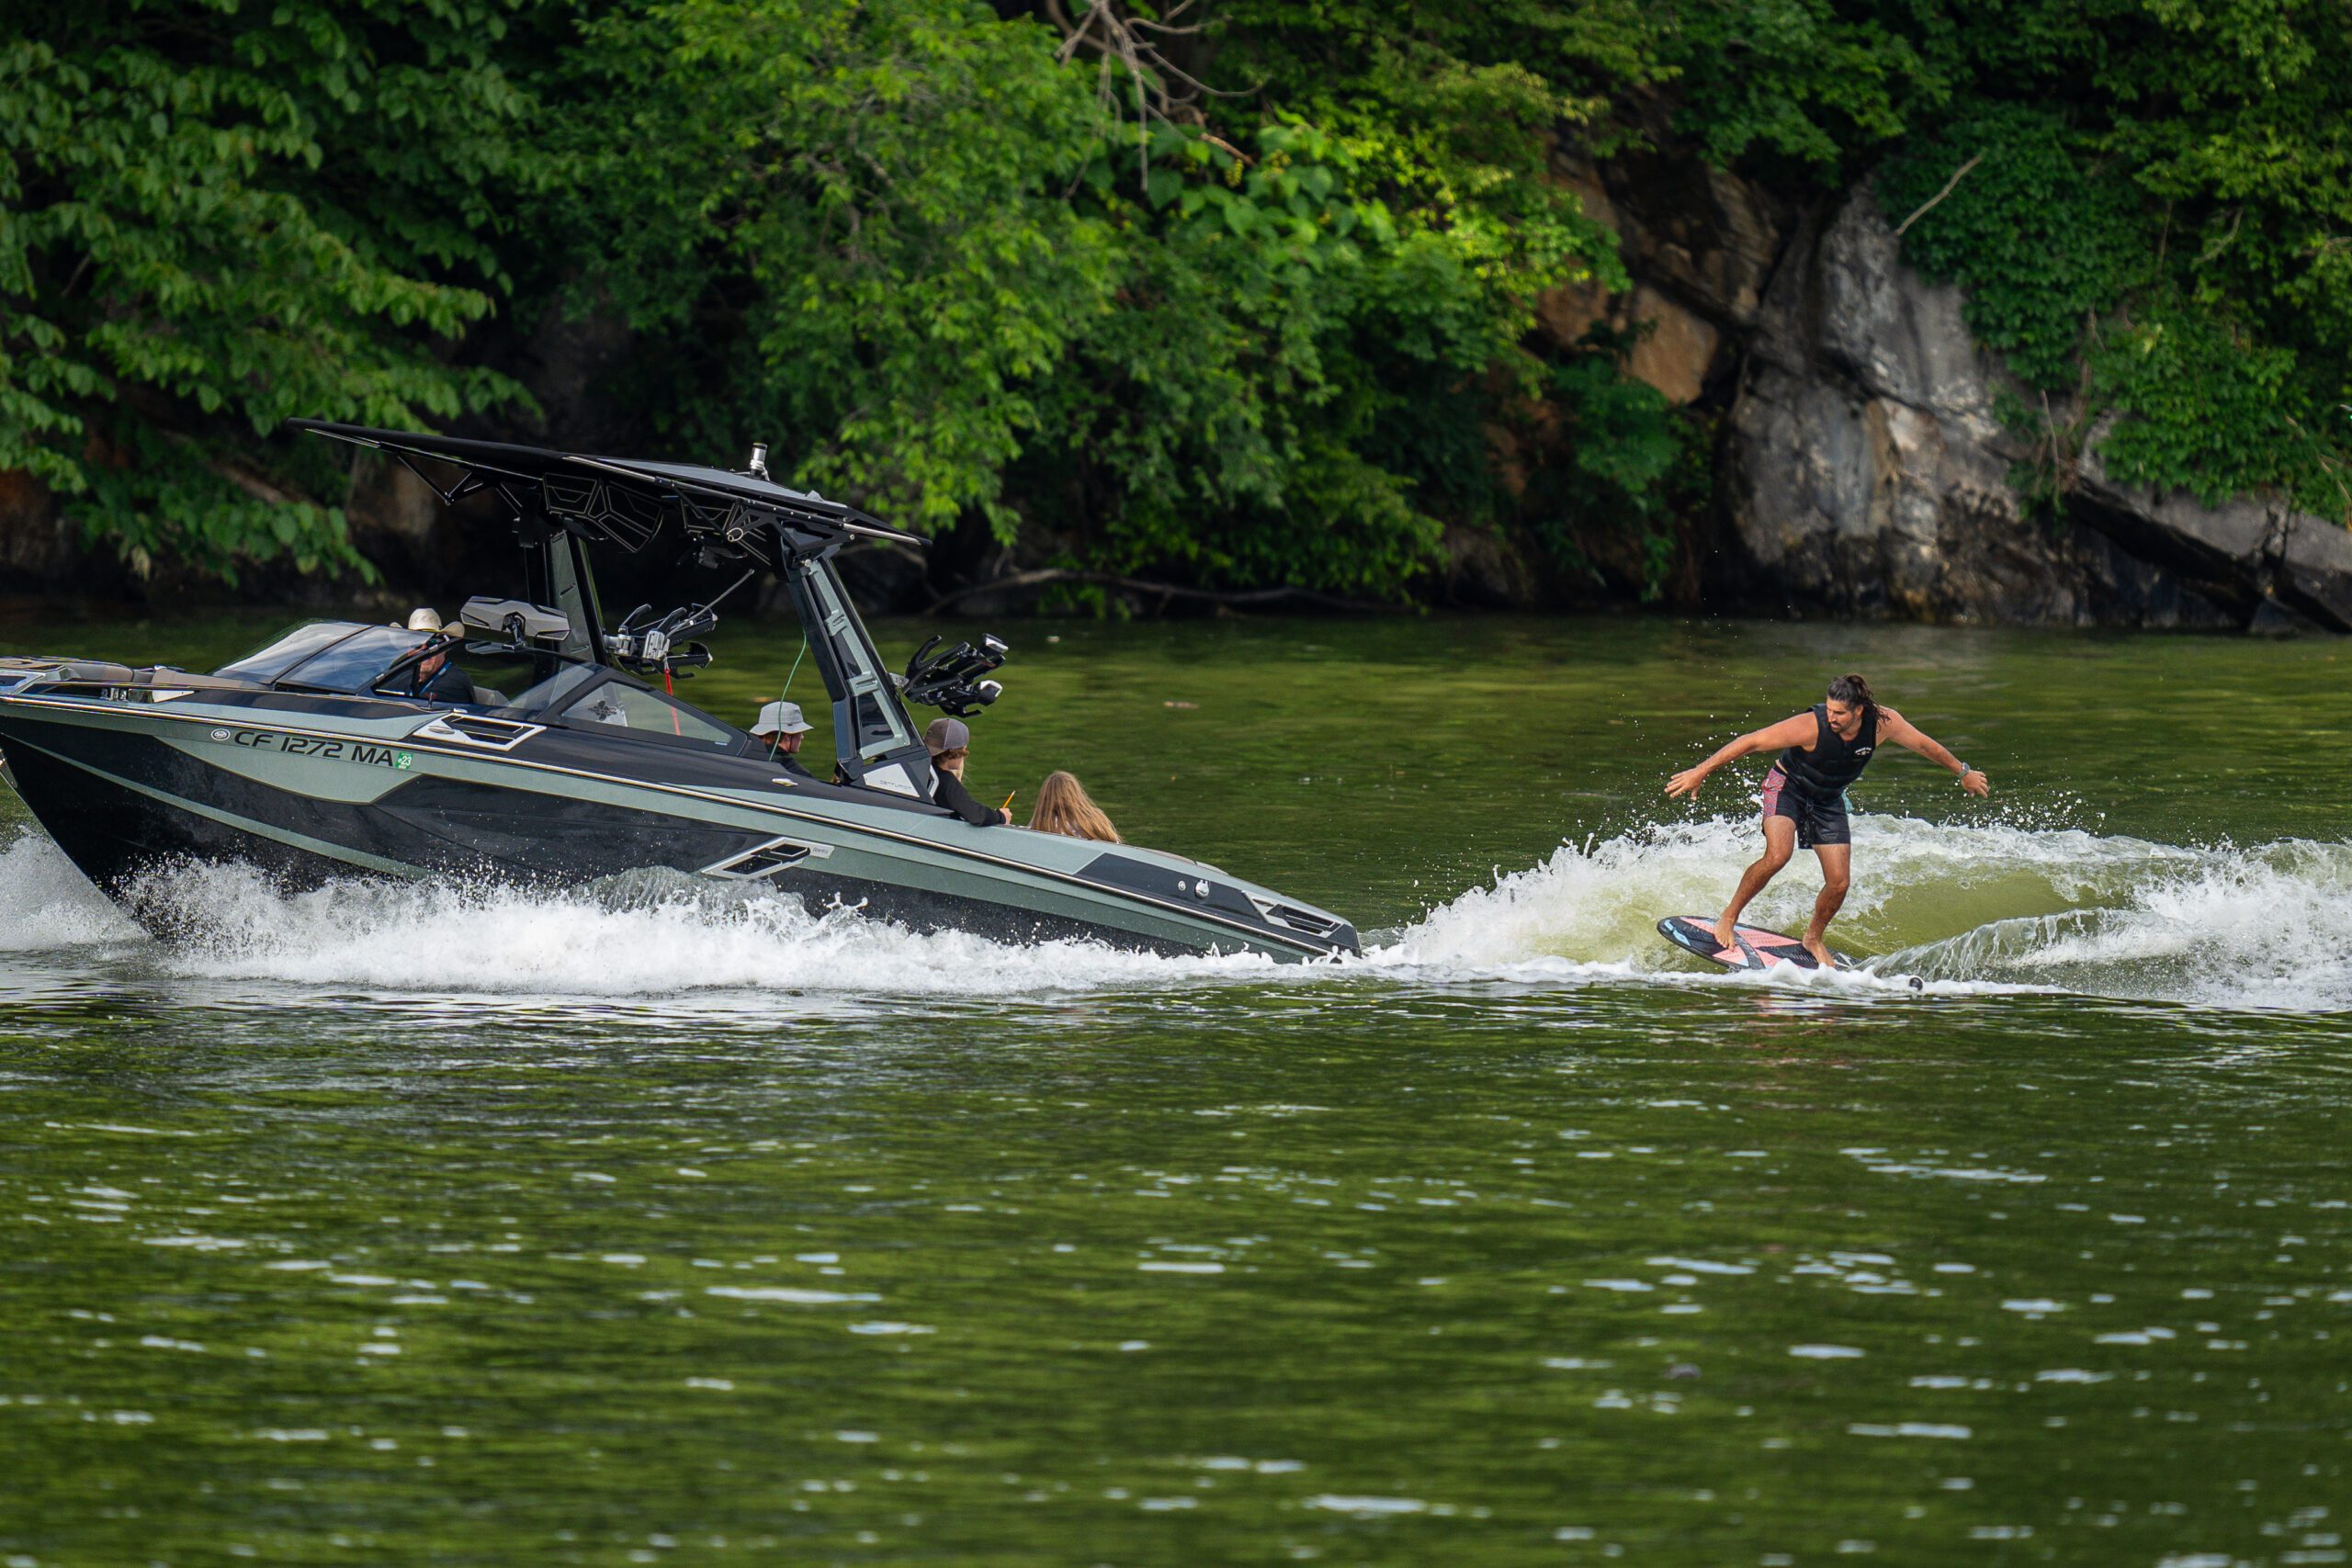 A boat tows a person wakeboarding on calm green waters surrounded by lush greenery, as part of the Volunteer Wake Surf Classic hosted by CBK Watersports.